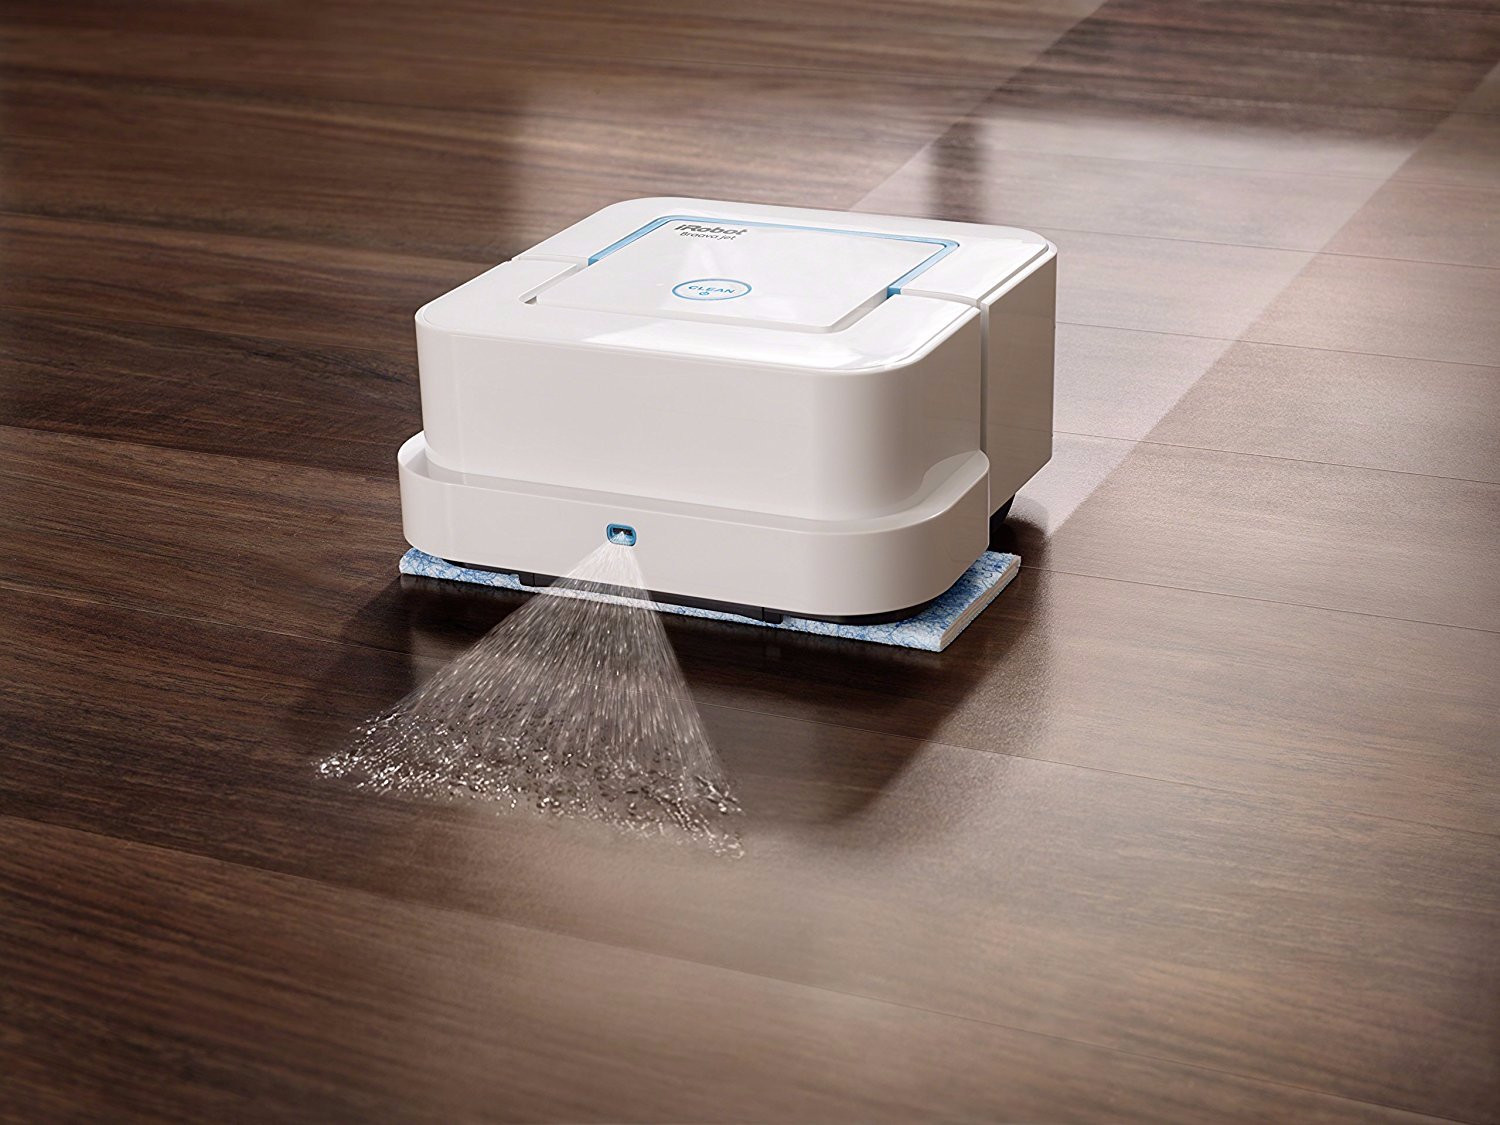 11 Lovable Lightweight Hardwood Floor Vacuum Reviews 2024 free download lightweight hardwood floor vacuum reviews of 12 smart home gadgets that practically clean the house for you inside irobot braava